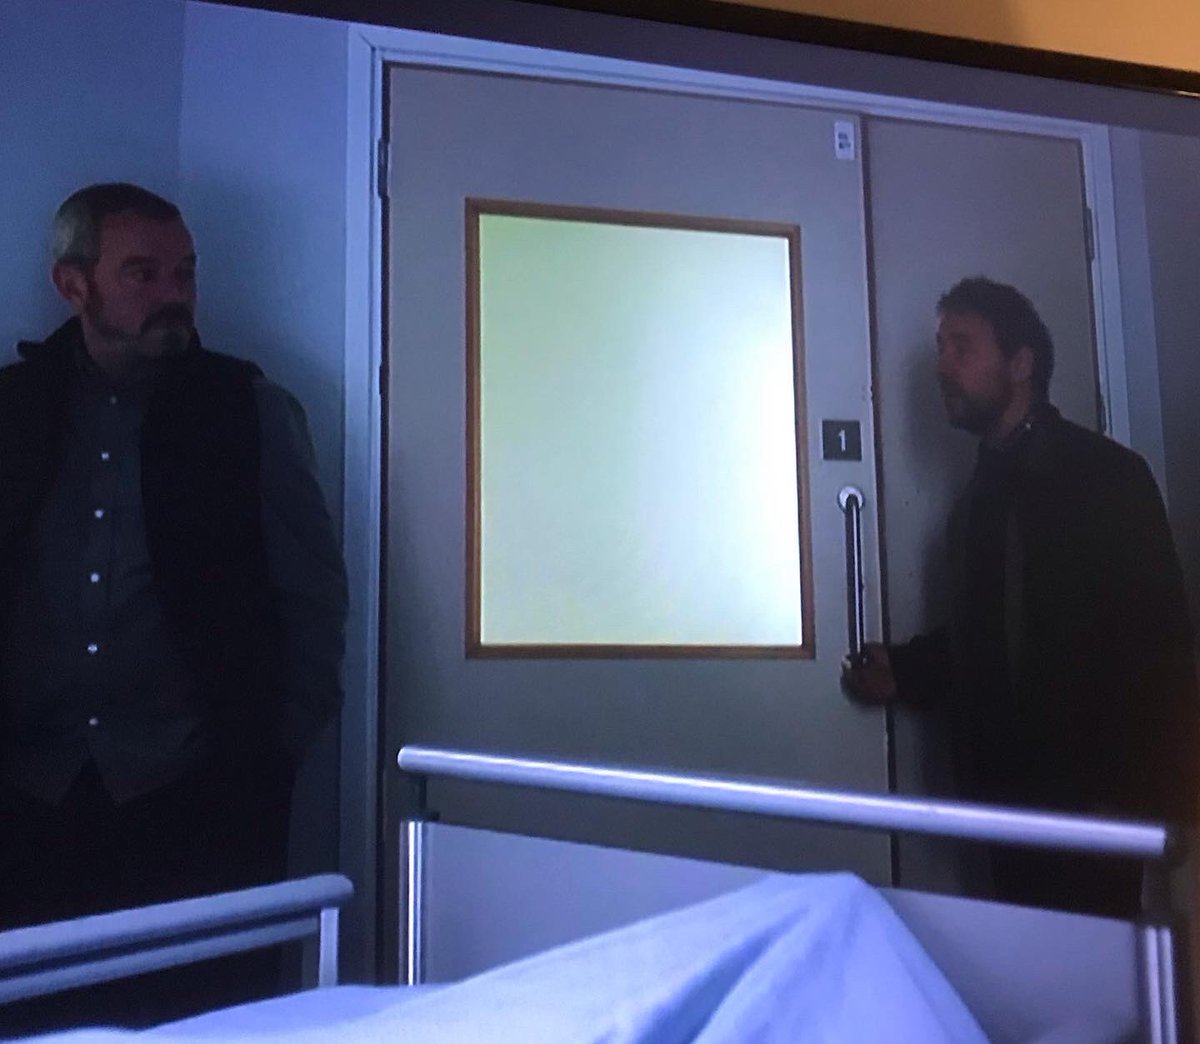 Enjoyed my cameo last night in the brilliant series ‘The Walk In’ with Stephen Graham on ITV last night. Well worth a watch (the series not me…) @itvdrama1 @StephenGraham73 @SoundcheckGrp